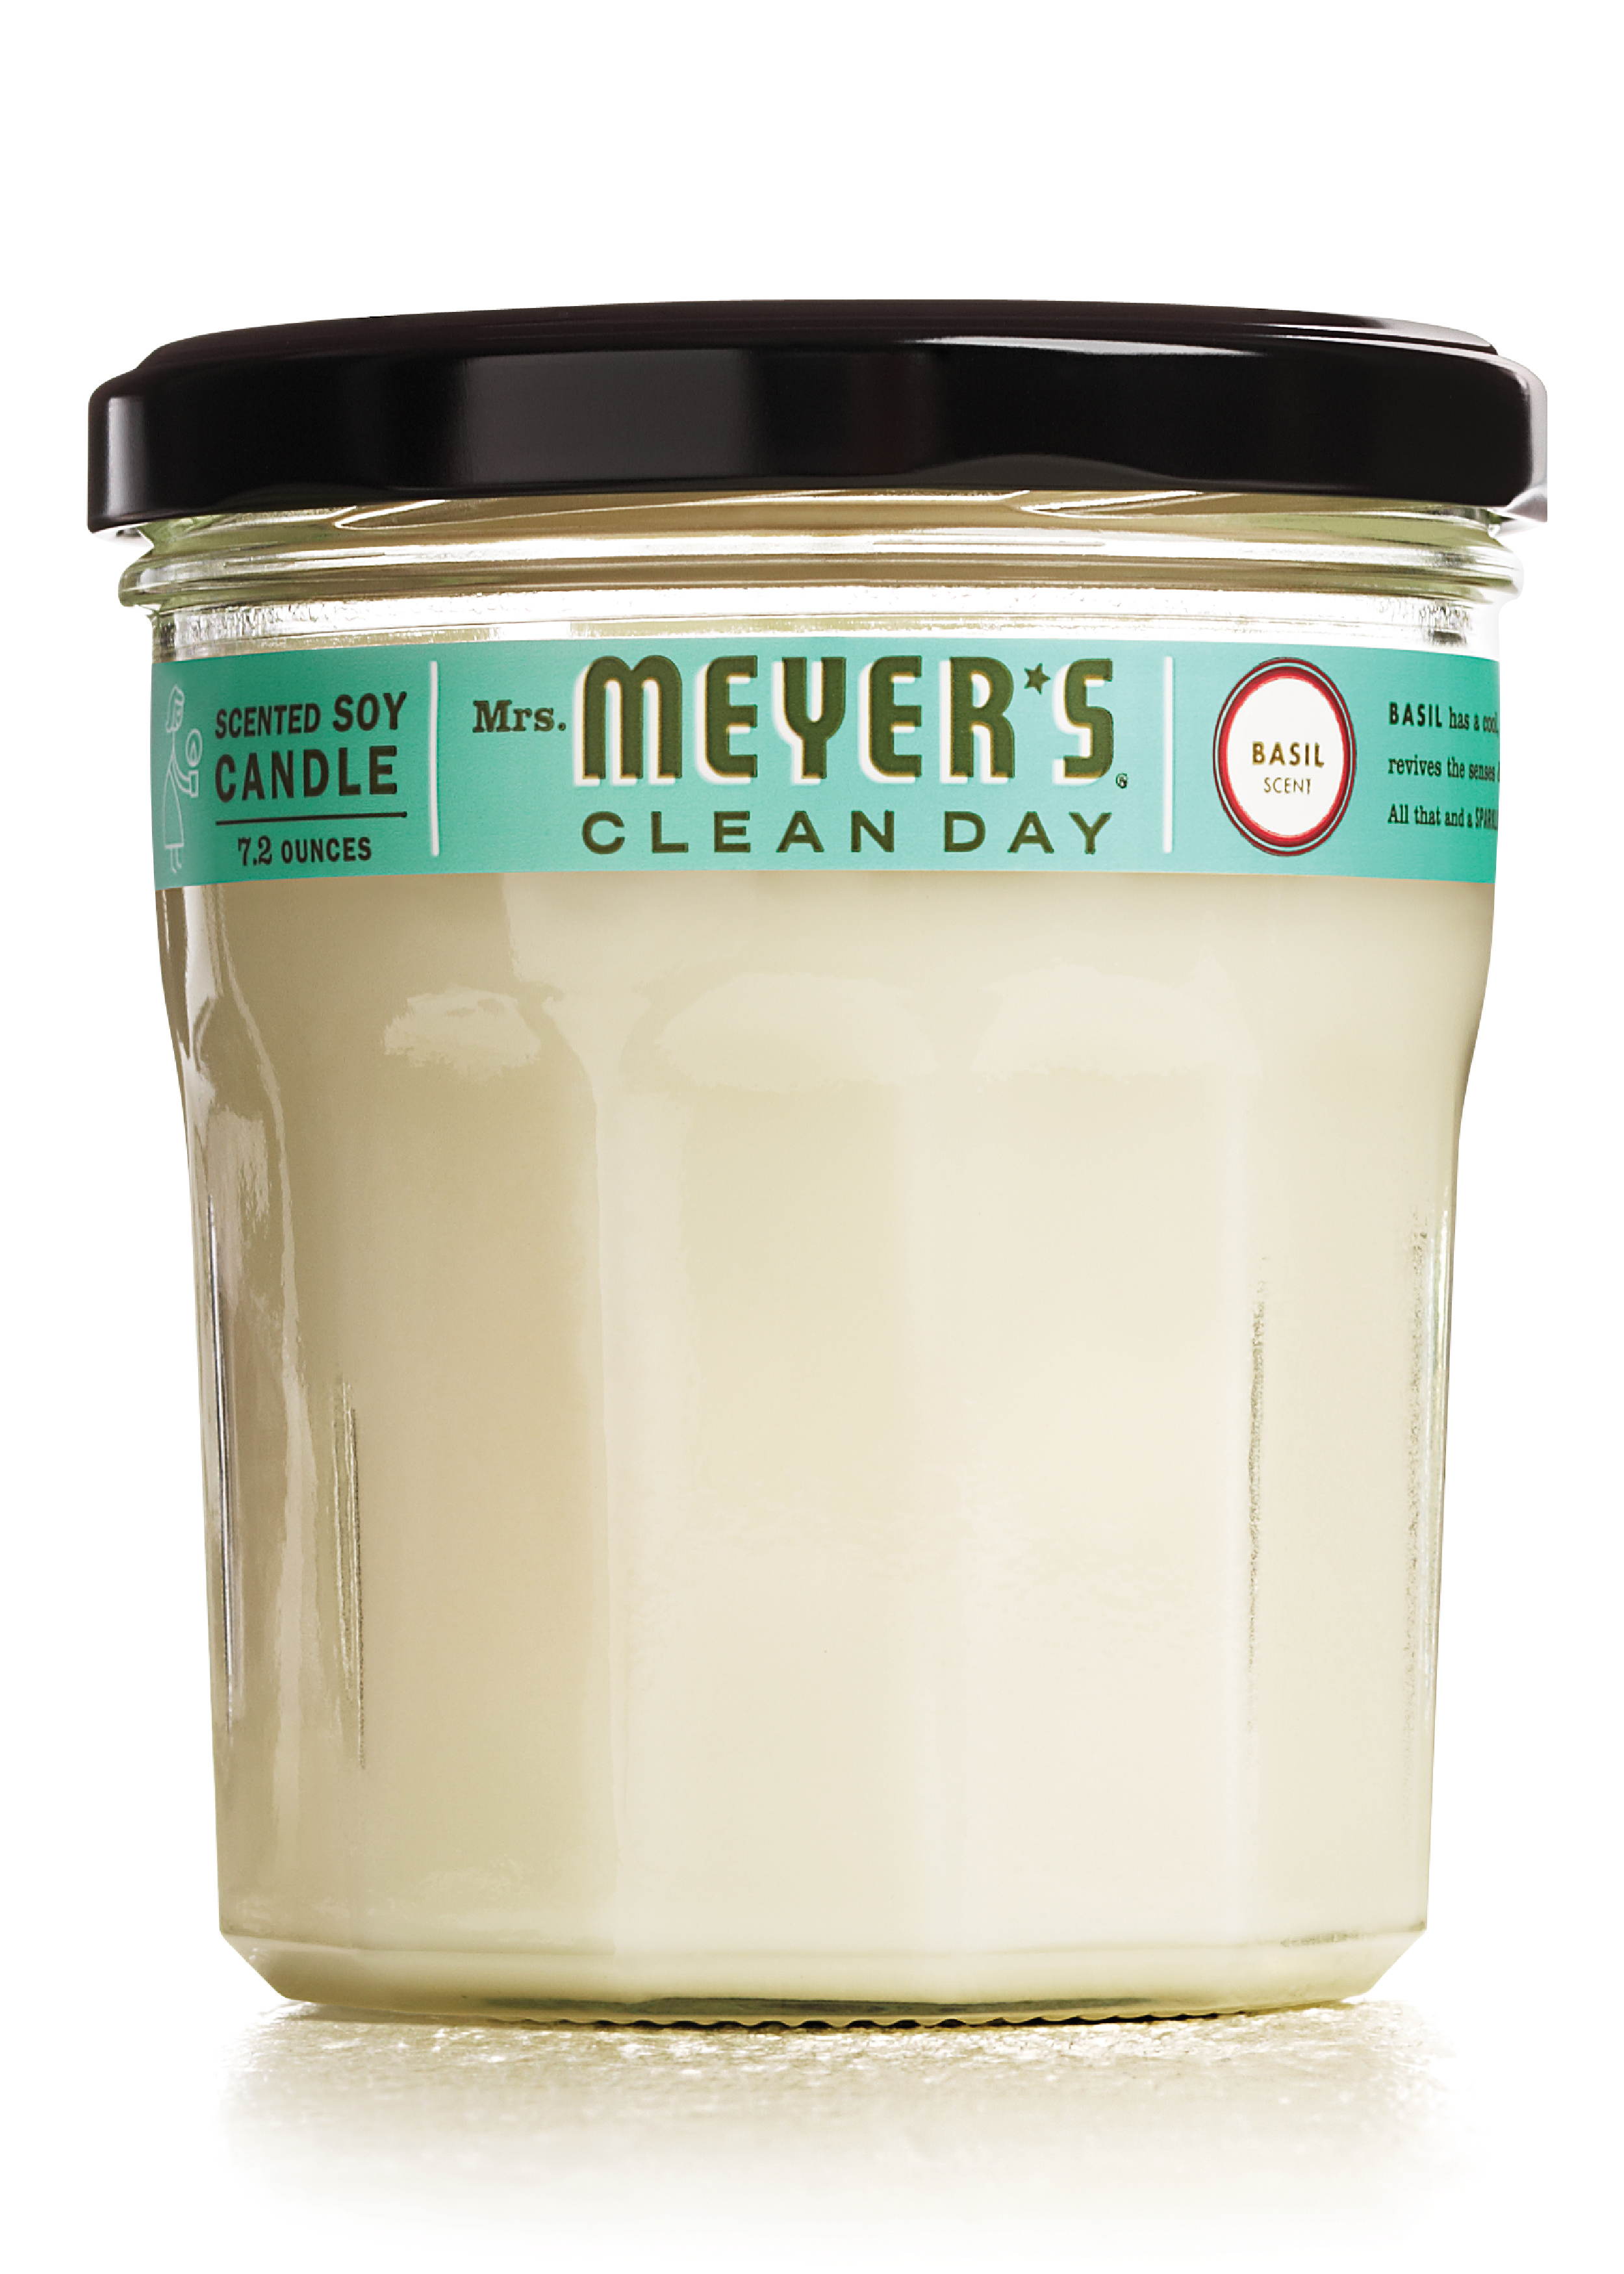 MMeyers_Basil_CandleSoy7